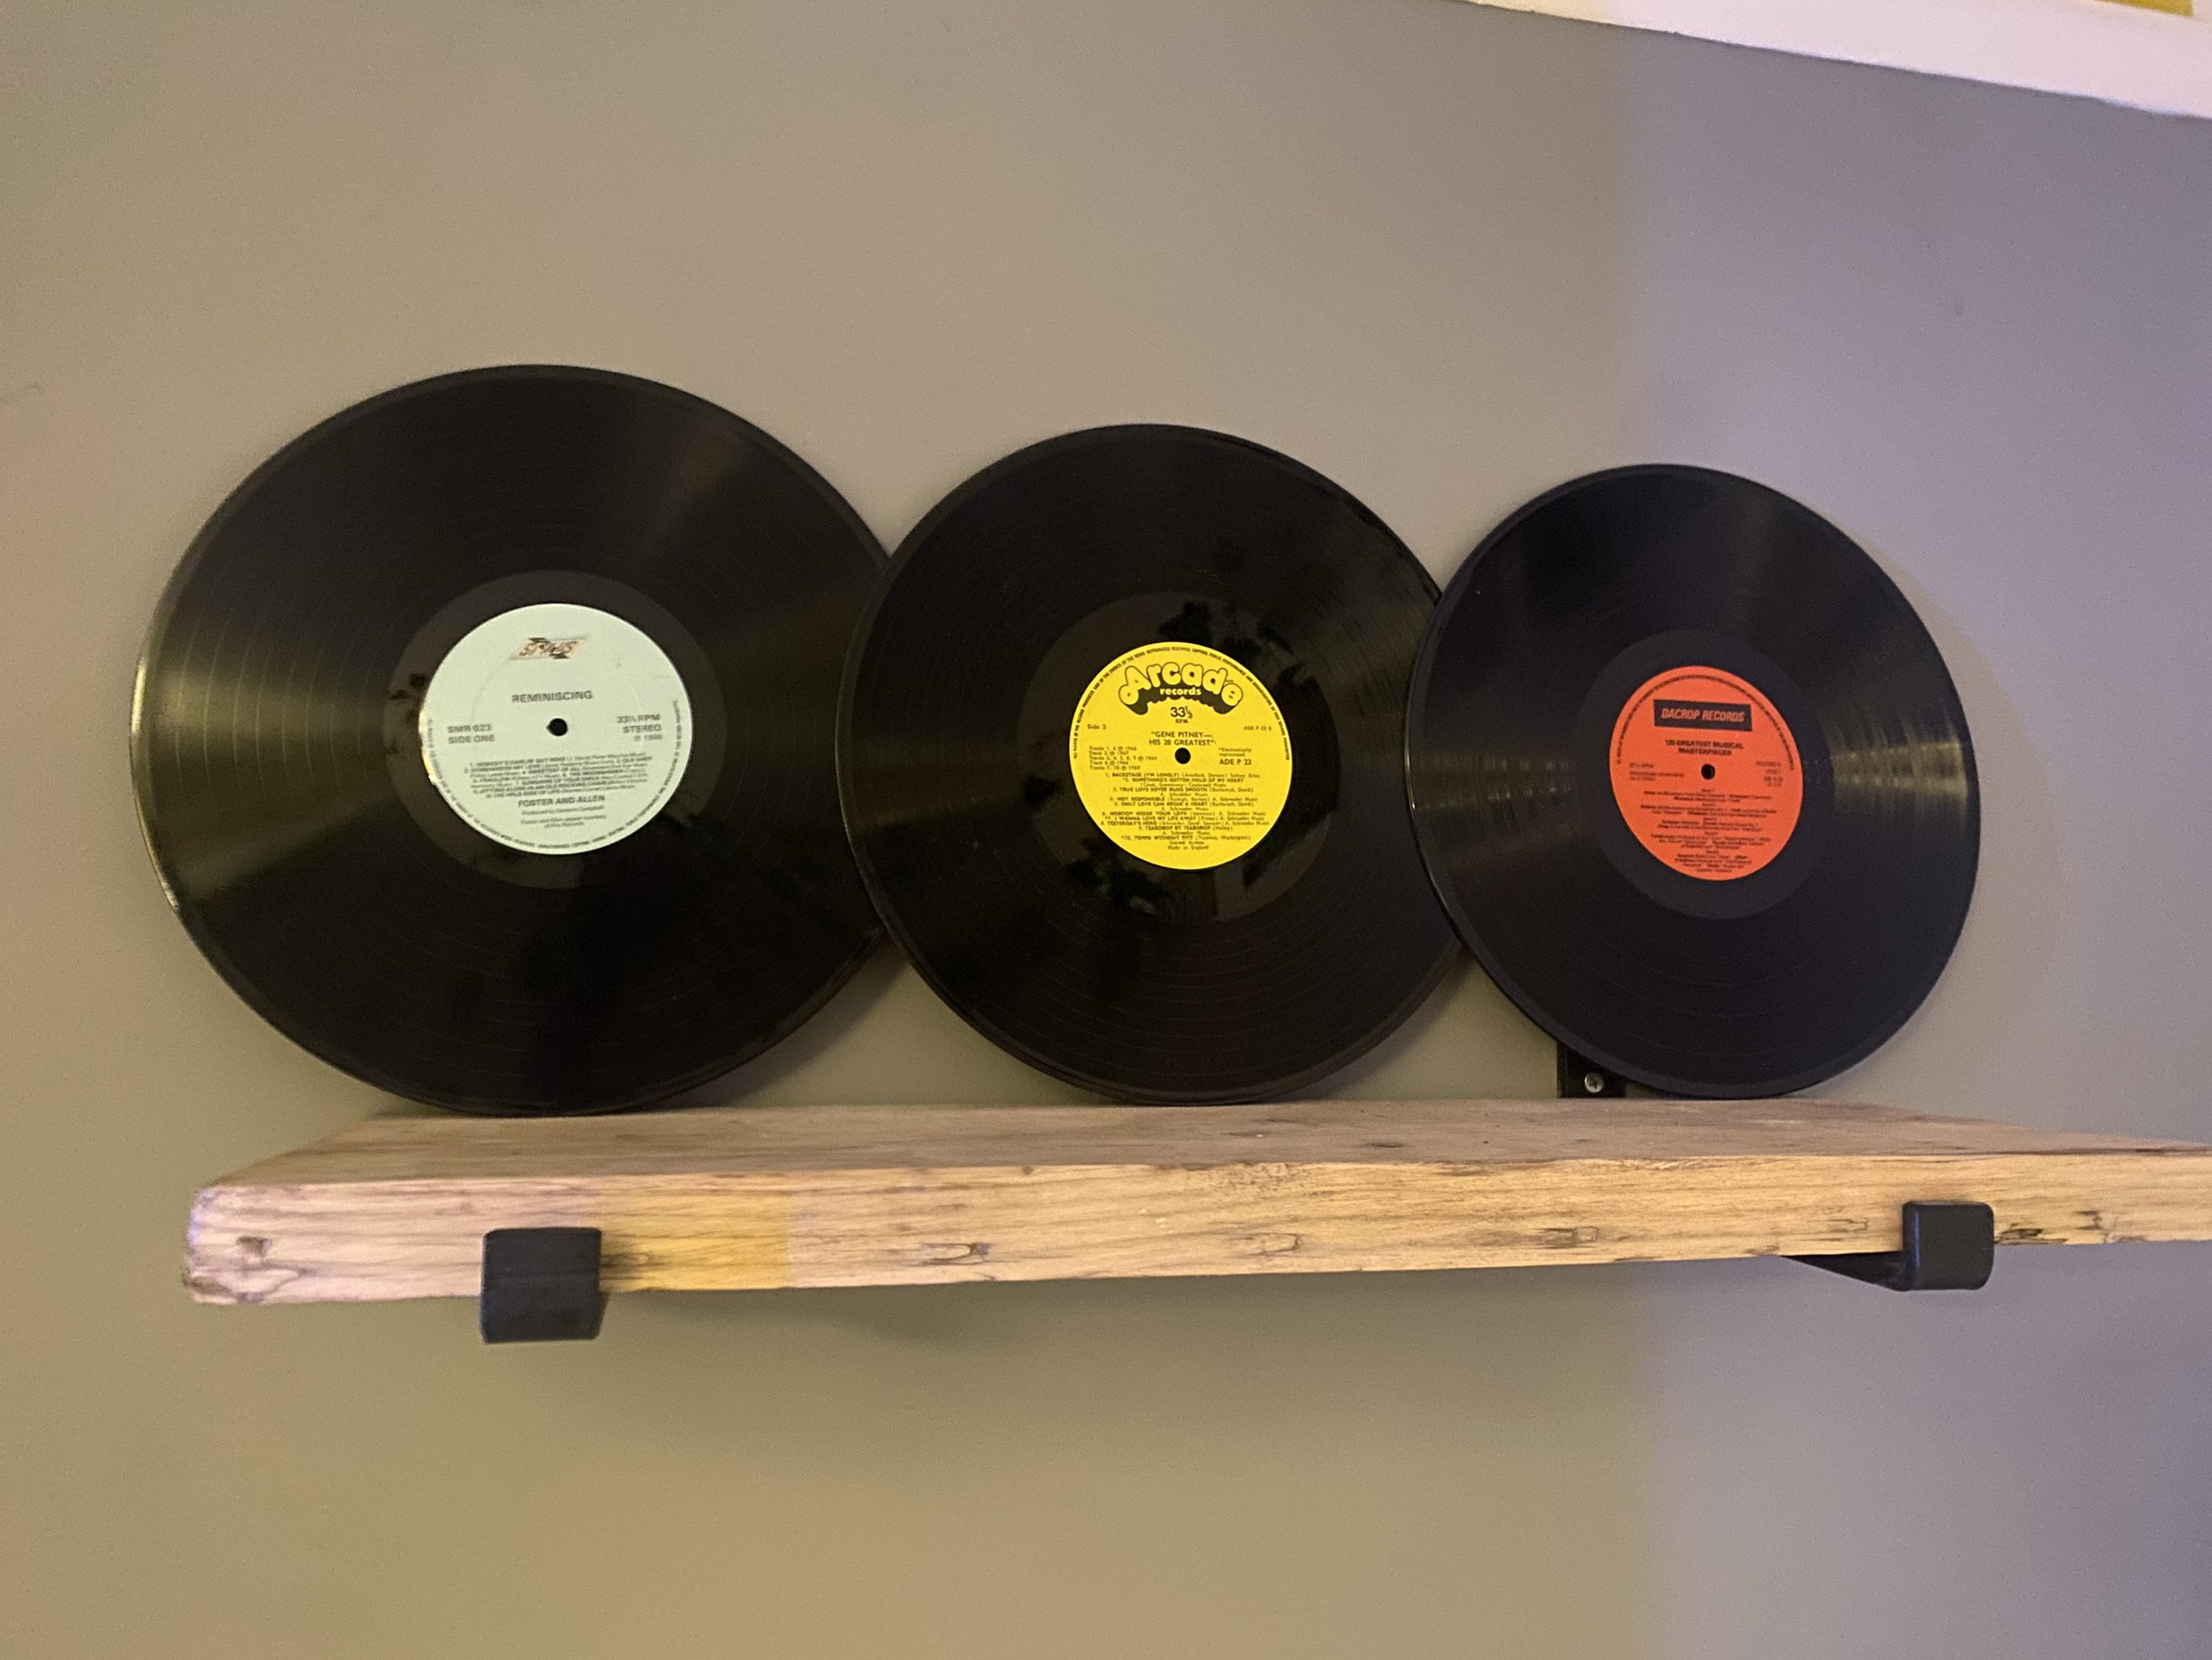 Lot of 10 12 Real Vinyl Records for Decor Wall Decoration Room and Home  Decor Wall Art Old Cool Vinyls Record Player Records Dorm Essential 